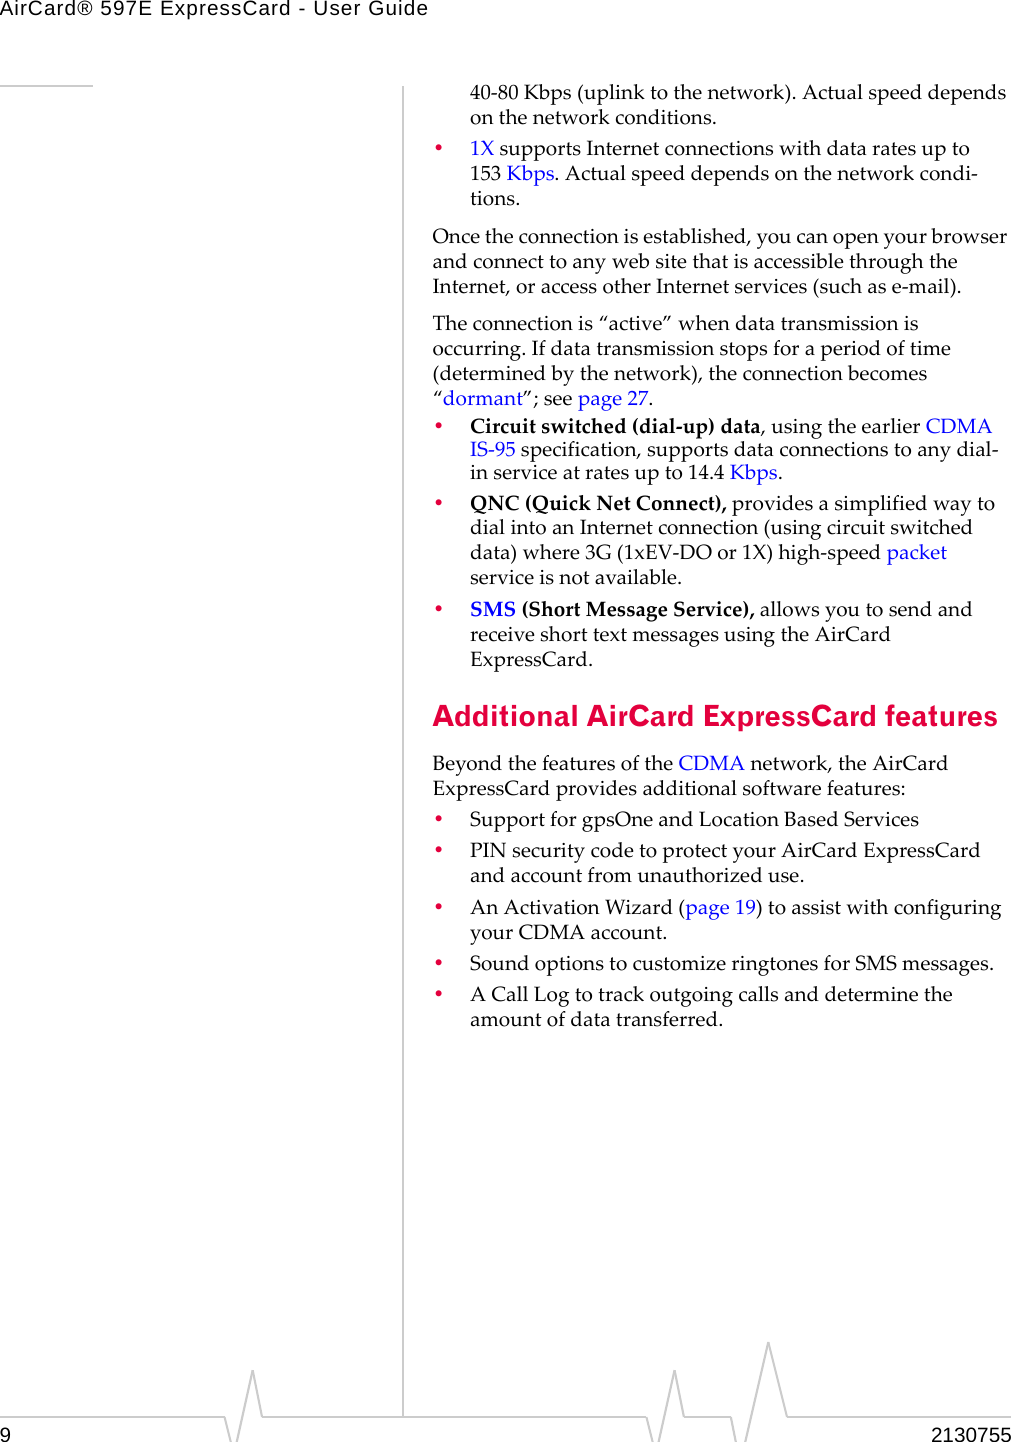 AirCard® 597E ExpressCard - User Guide9213075540‐80 Kbps(uplinktothenetwork).Actualspeeddependsonthenetworkconditions.•1XsupportsInternetconnectionswithdataratesupto153 Kbps.Actualspeeddependsonthenetworkcondi‐tions.Oncetheconnectionisestablished,youcanopenyourbrowserandconnecttoanywebsitethatisaccessiblethroughtheInternet,oraccessotherInternetservices(suchase‐mail).Theconnectionis“active”whendatatransmissionisoccurring.Ifdatatransmissionstopsforaperiodoftime(determinedbythenetwork),theconnectionbecomes“dormant”;seepage 27.•Circuitswitched(dial‐up)data,usingtheearlierCDMAIS‐95specification,supportsdataconnectionstoanydial‐inserviceatratesupto14.4 Kbps.•QNC (QuickNetConnect),providesasimplifiedwaytodialintoanInternetconnection(usingcircuitswitcheddata)where3G(1xEV‐DOor1X)high‐speedpacketserviceisnotavailable.•SMS (ShortMessageService),allowsyoutosendandreceiveshorttextmessagesusingtheAirCardExpressCard.Additional AirCard ExpressCard featuresBeyondthefeaturesoftheCDMAnetwork,theAirCardExpressCardprovidesadditionalsoftwarefeatures:•SupportforgpsOneandLocationBasedServices•PINsecuritycodetoprotectyourAirCardExpressCardandaccountfromunauthorizeduse.•AnActivationWizard(page 19)toassistwithconfiguringyourCDMAaccount.•SoundoptionstocustomizeringtonesforSMSmessages.•ACallLogtotrackoutgoingcallsanddeterminetheamountofdatatransferred.